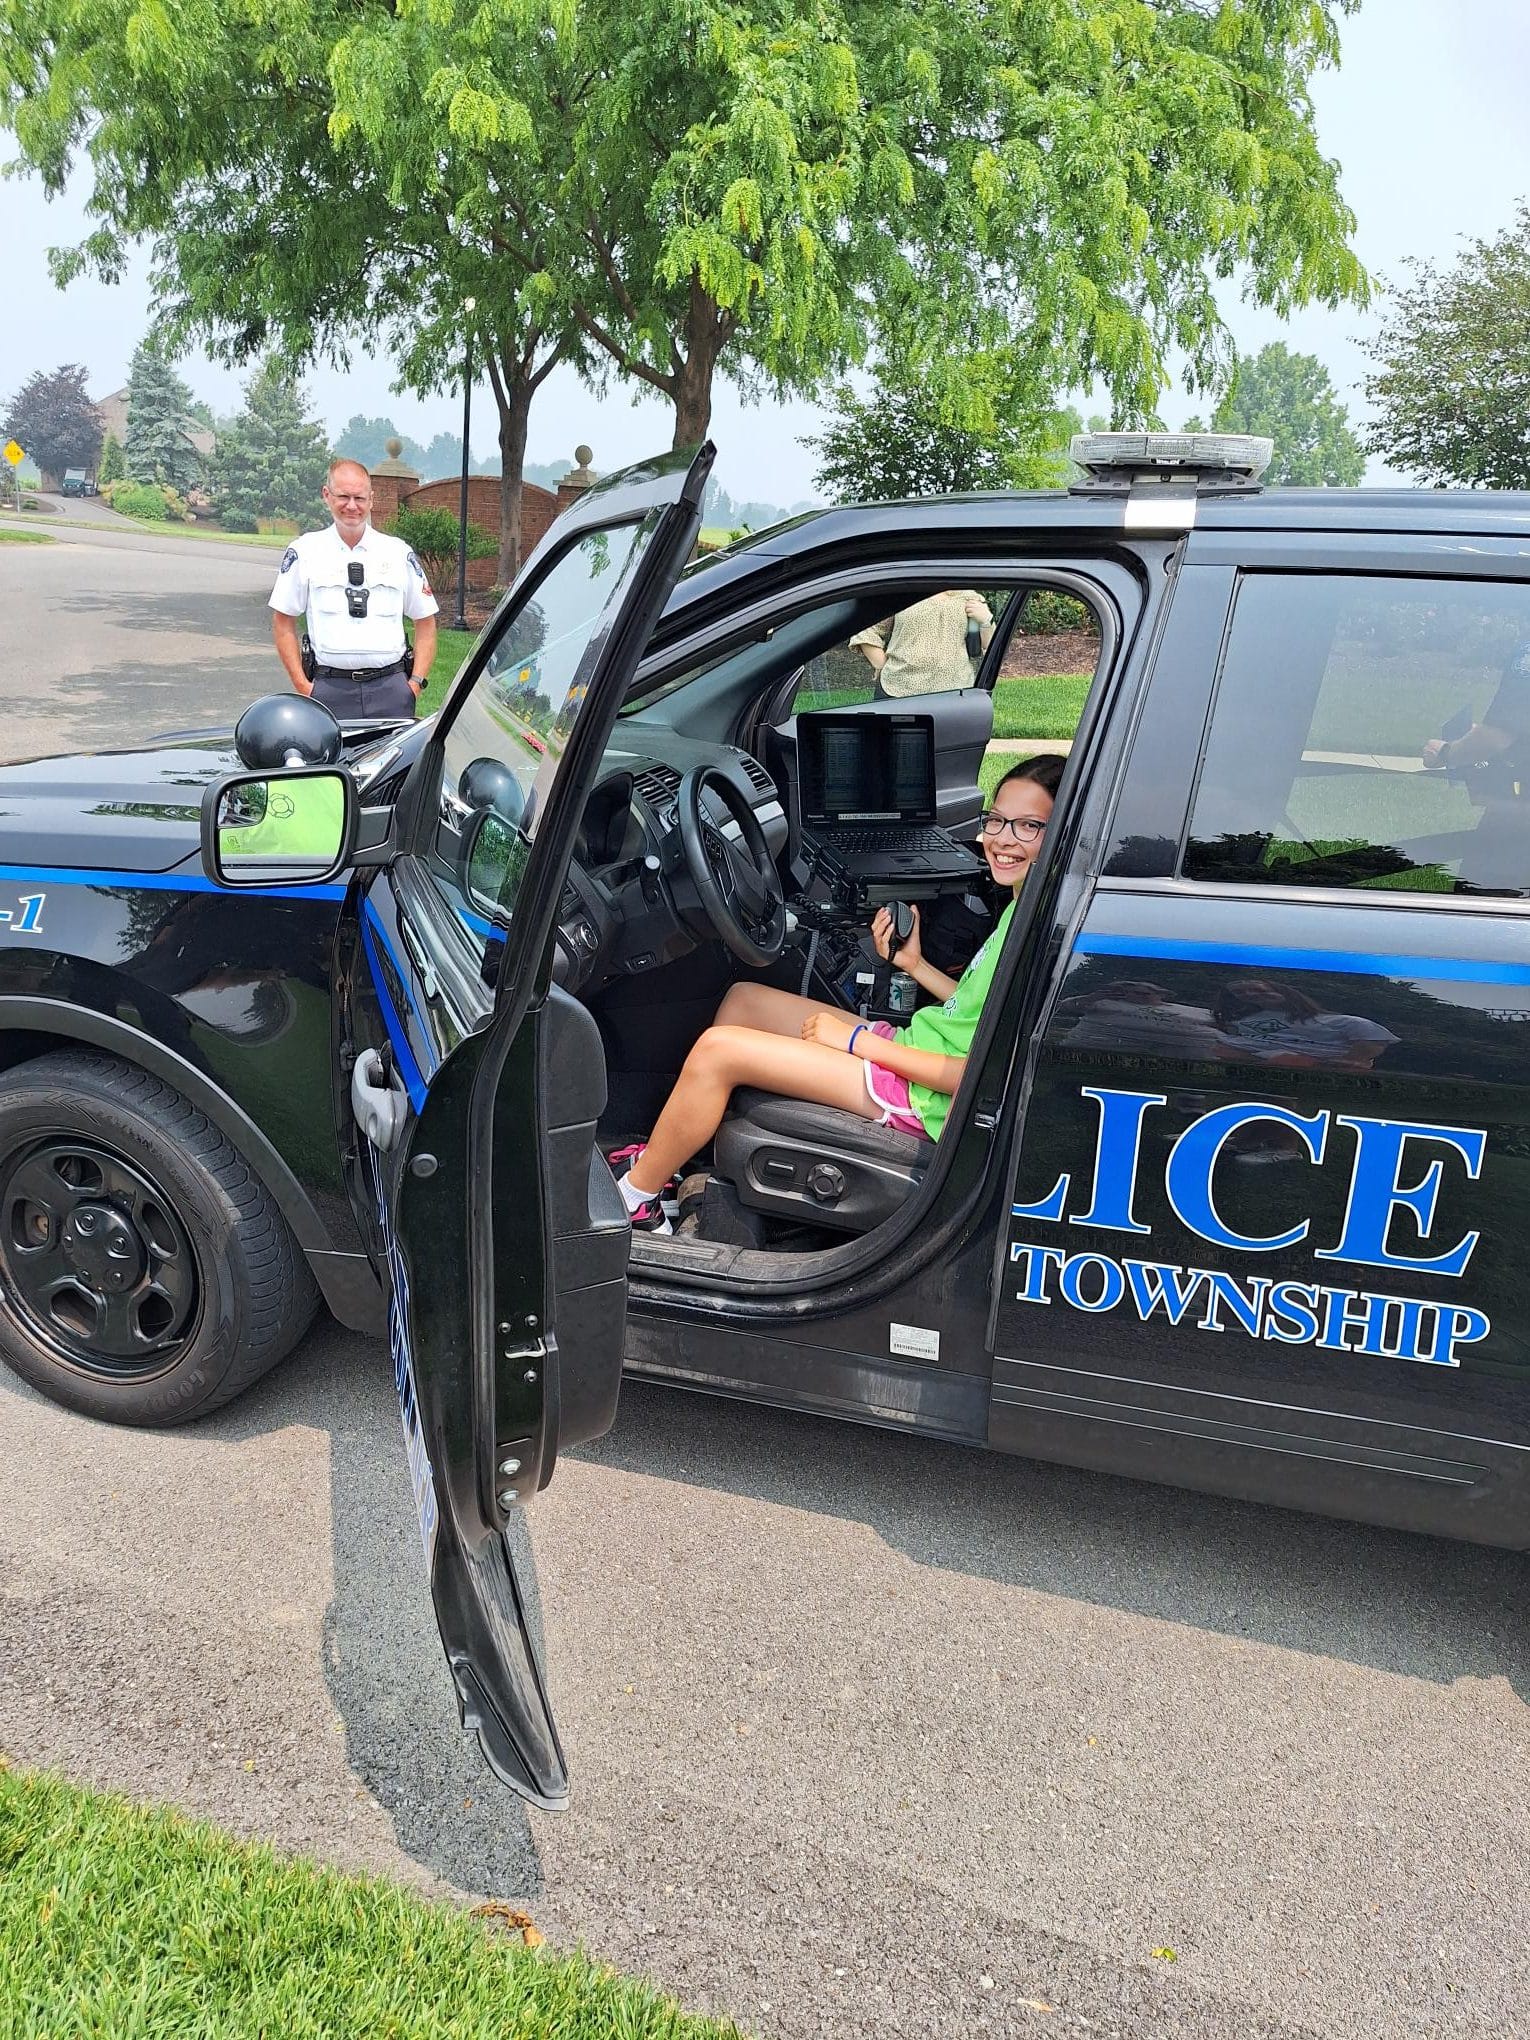 Collier Police with girl